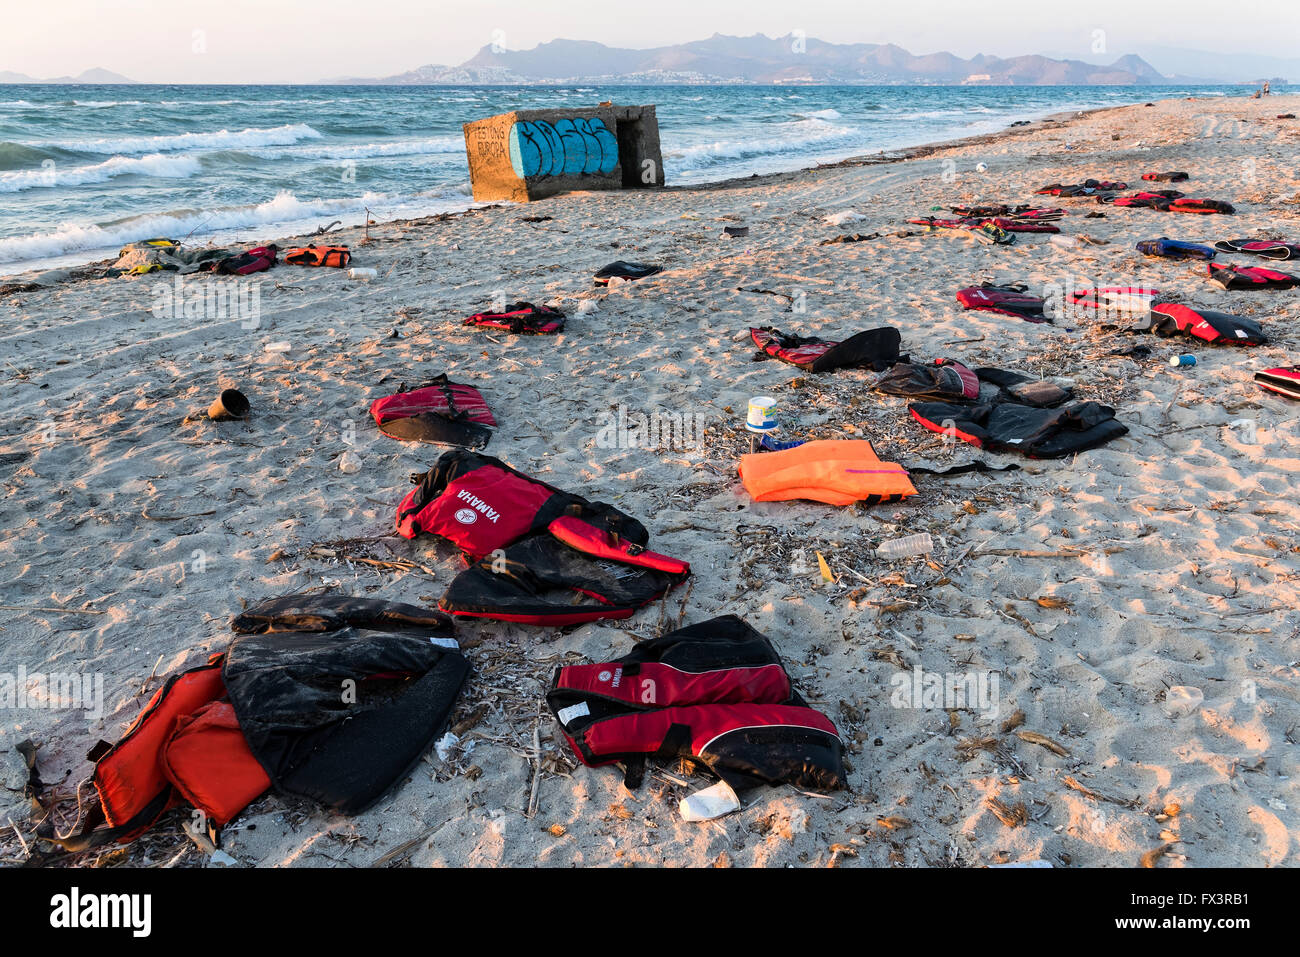 Abandoned life savers of refugees on October 6, 2015 on a beach of Kos island, Greece. Stock Photo